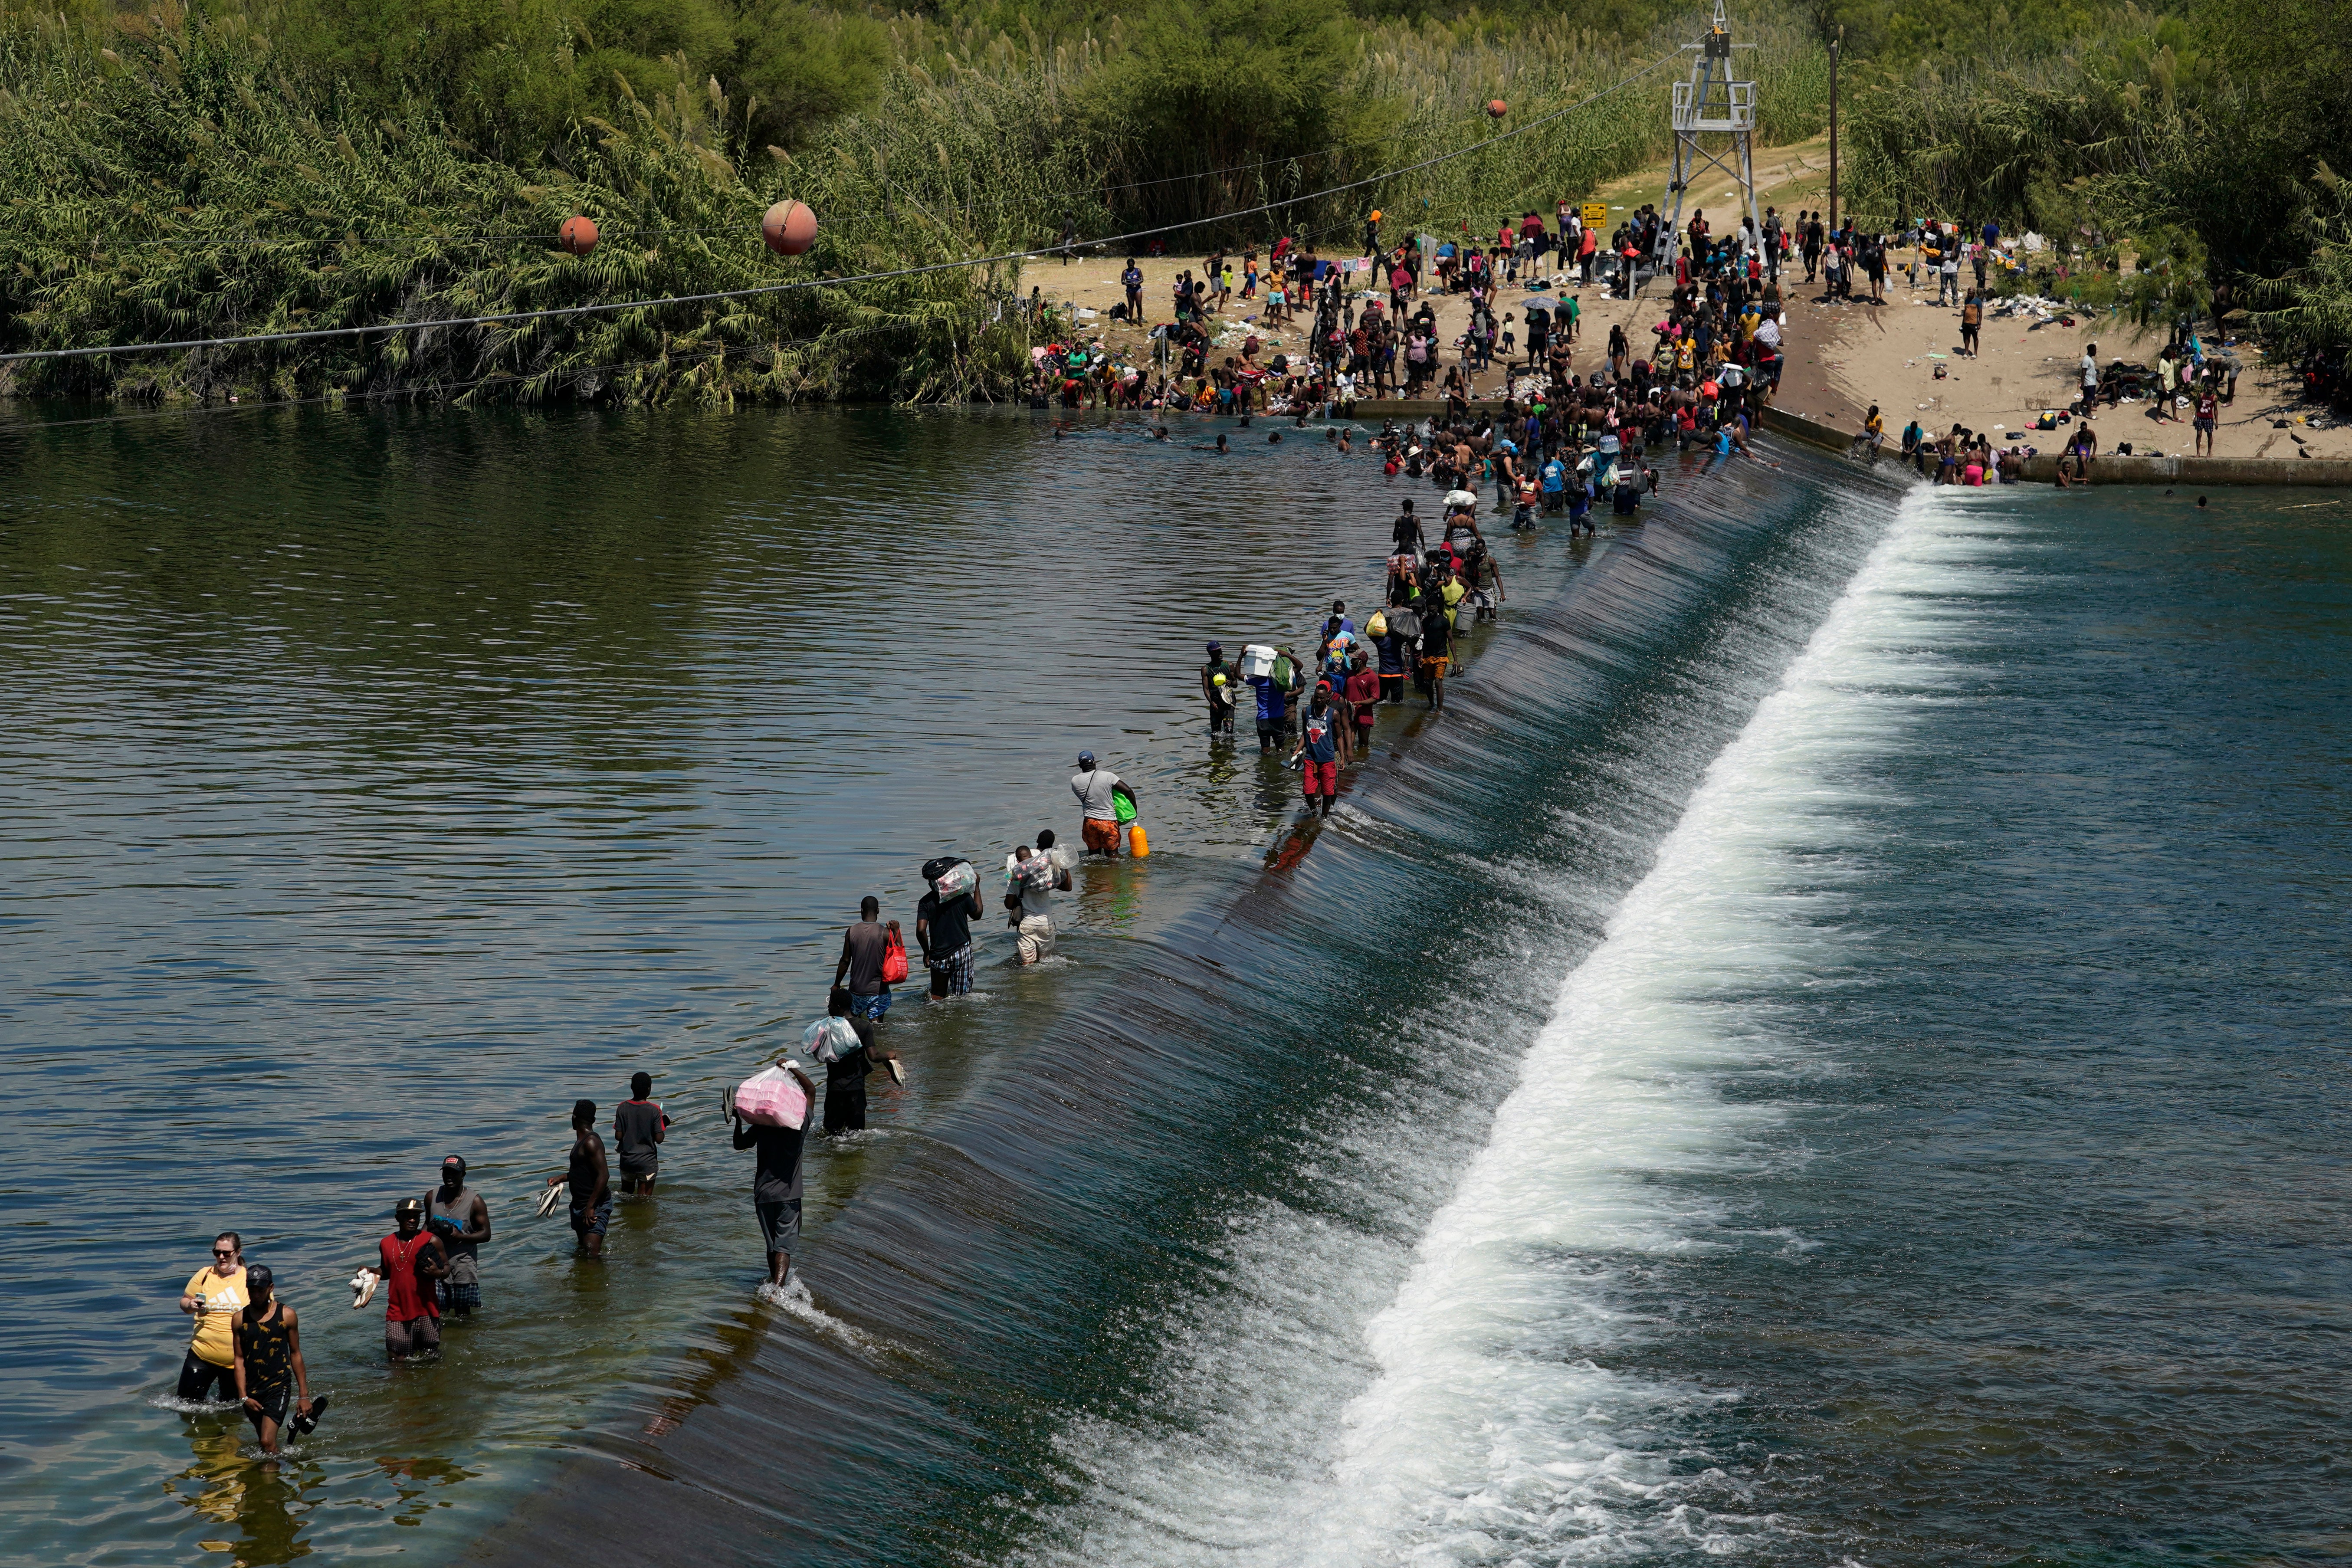 Haitian migrants use a dam to cross from Mexico into the United States